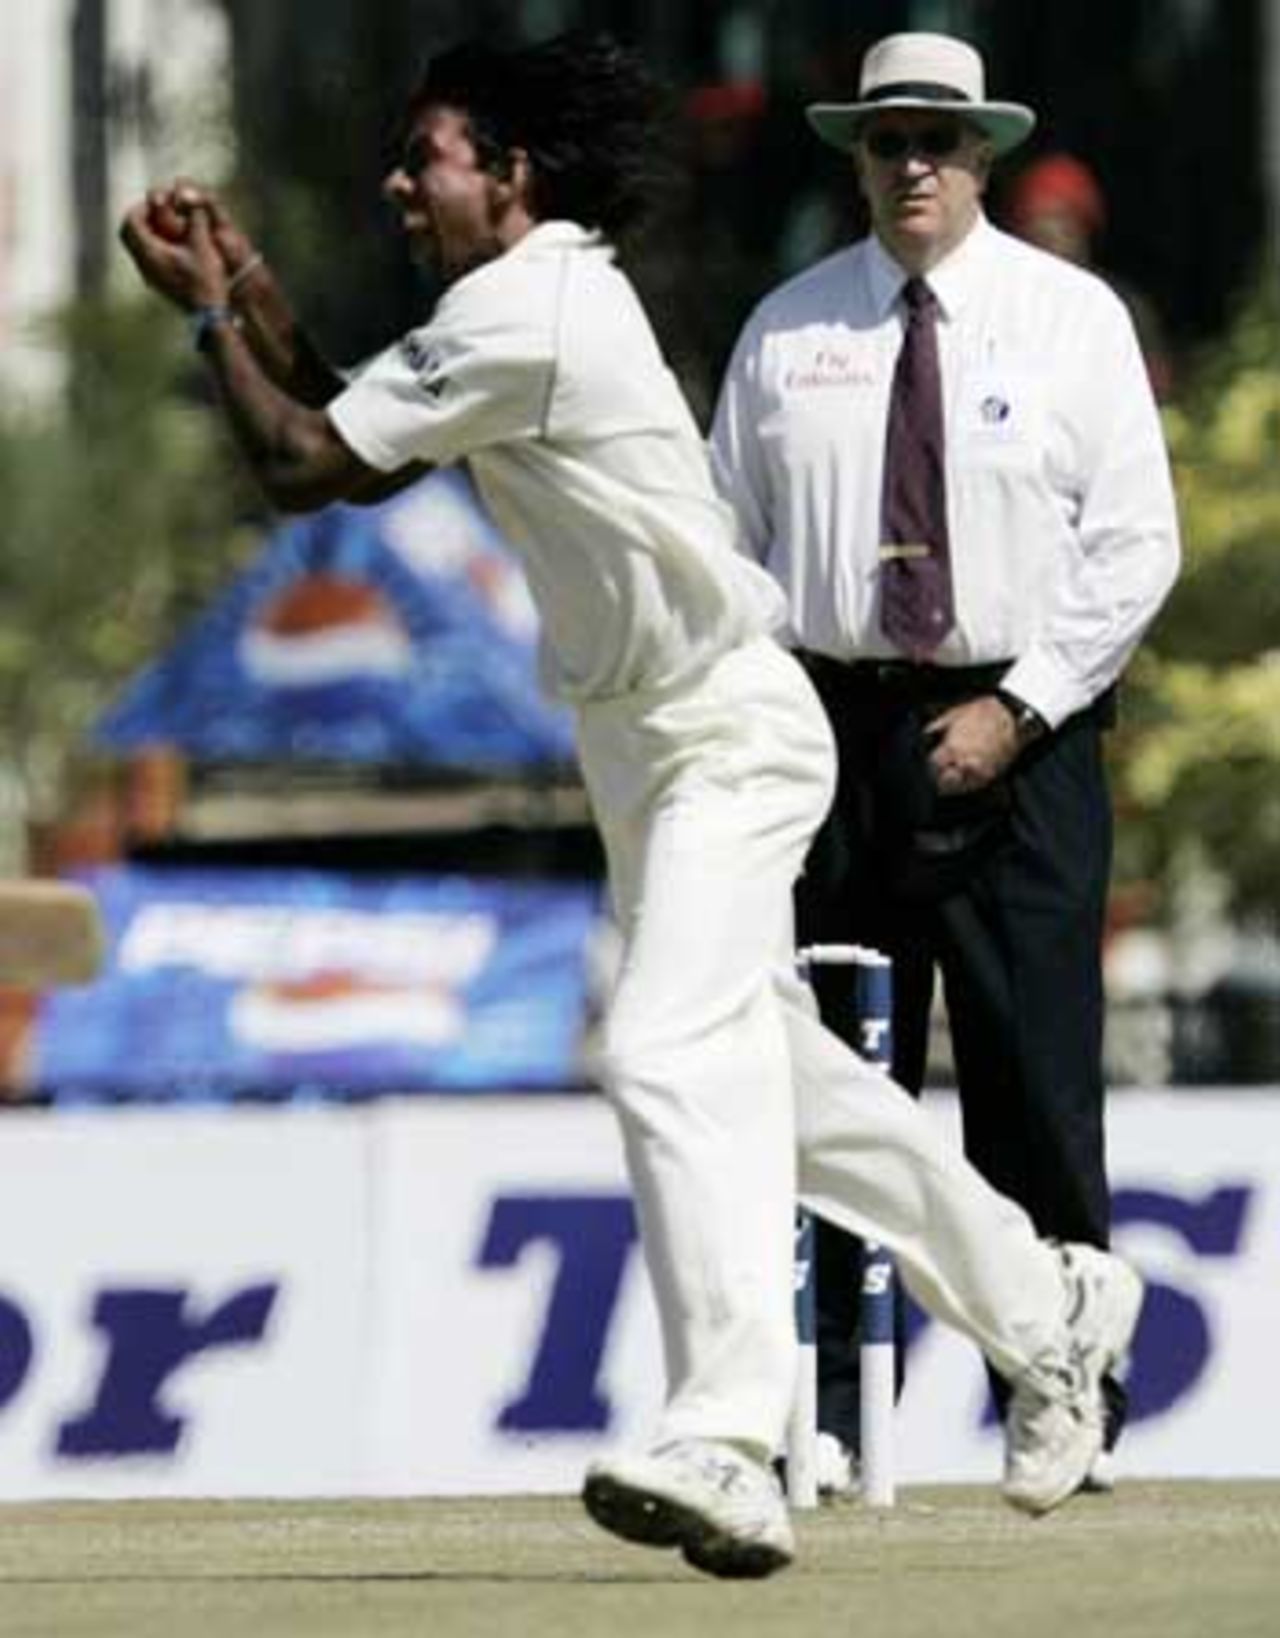 Then India turned it on as L Balaji plucked a return catch to start things off, India v Pakistan, 1st Test, Mohali, March 11, 2005